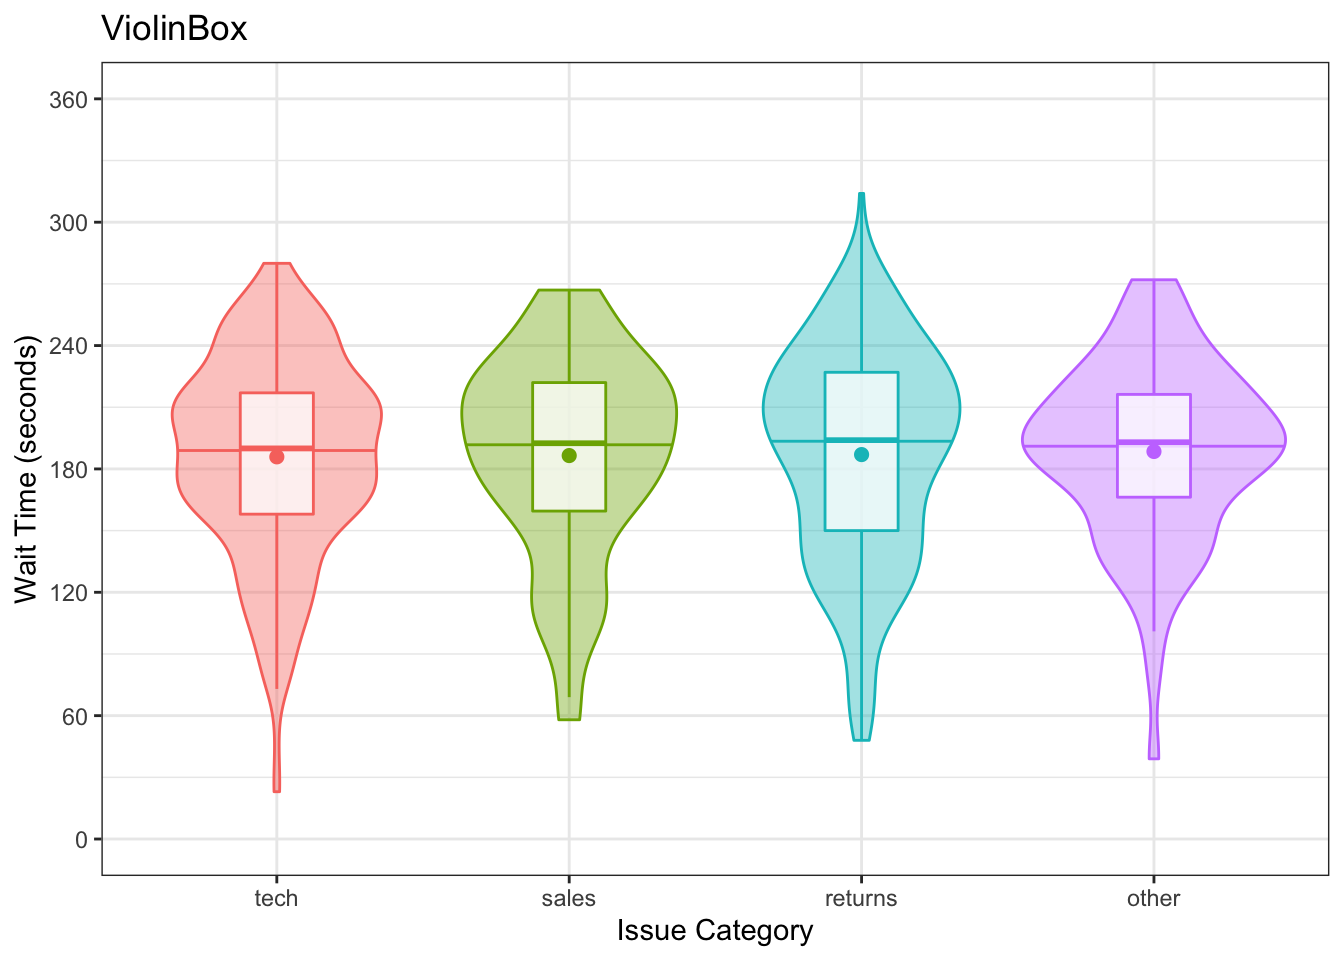 Violin plots combined with different methods to represent means and medians.